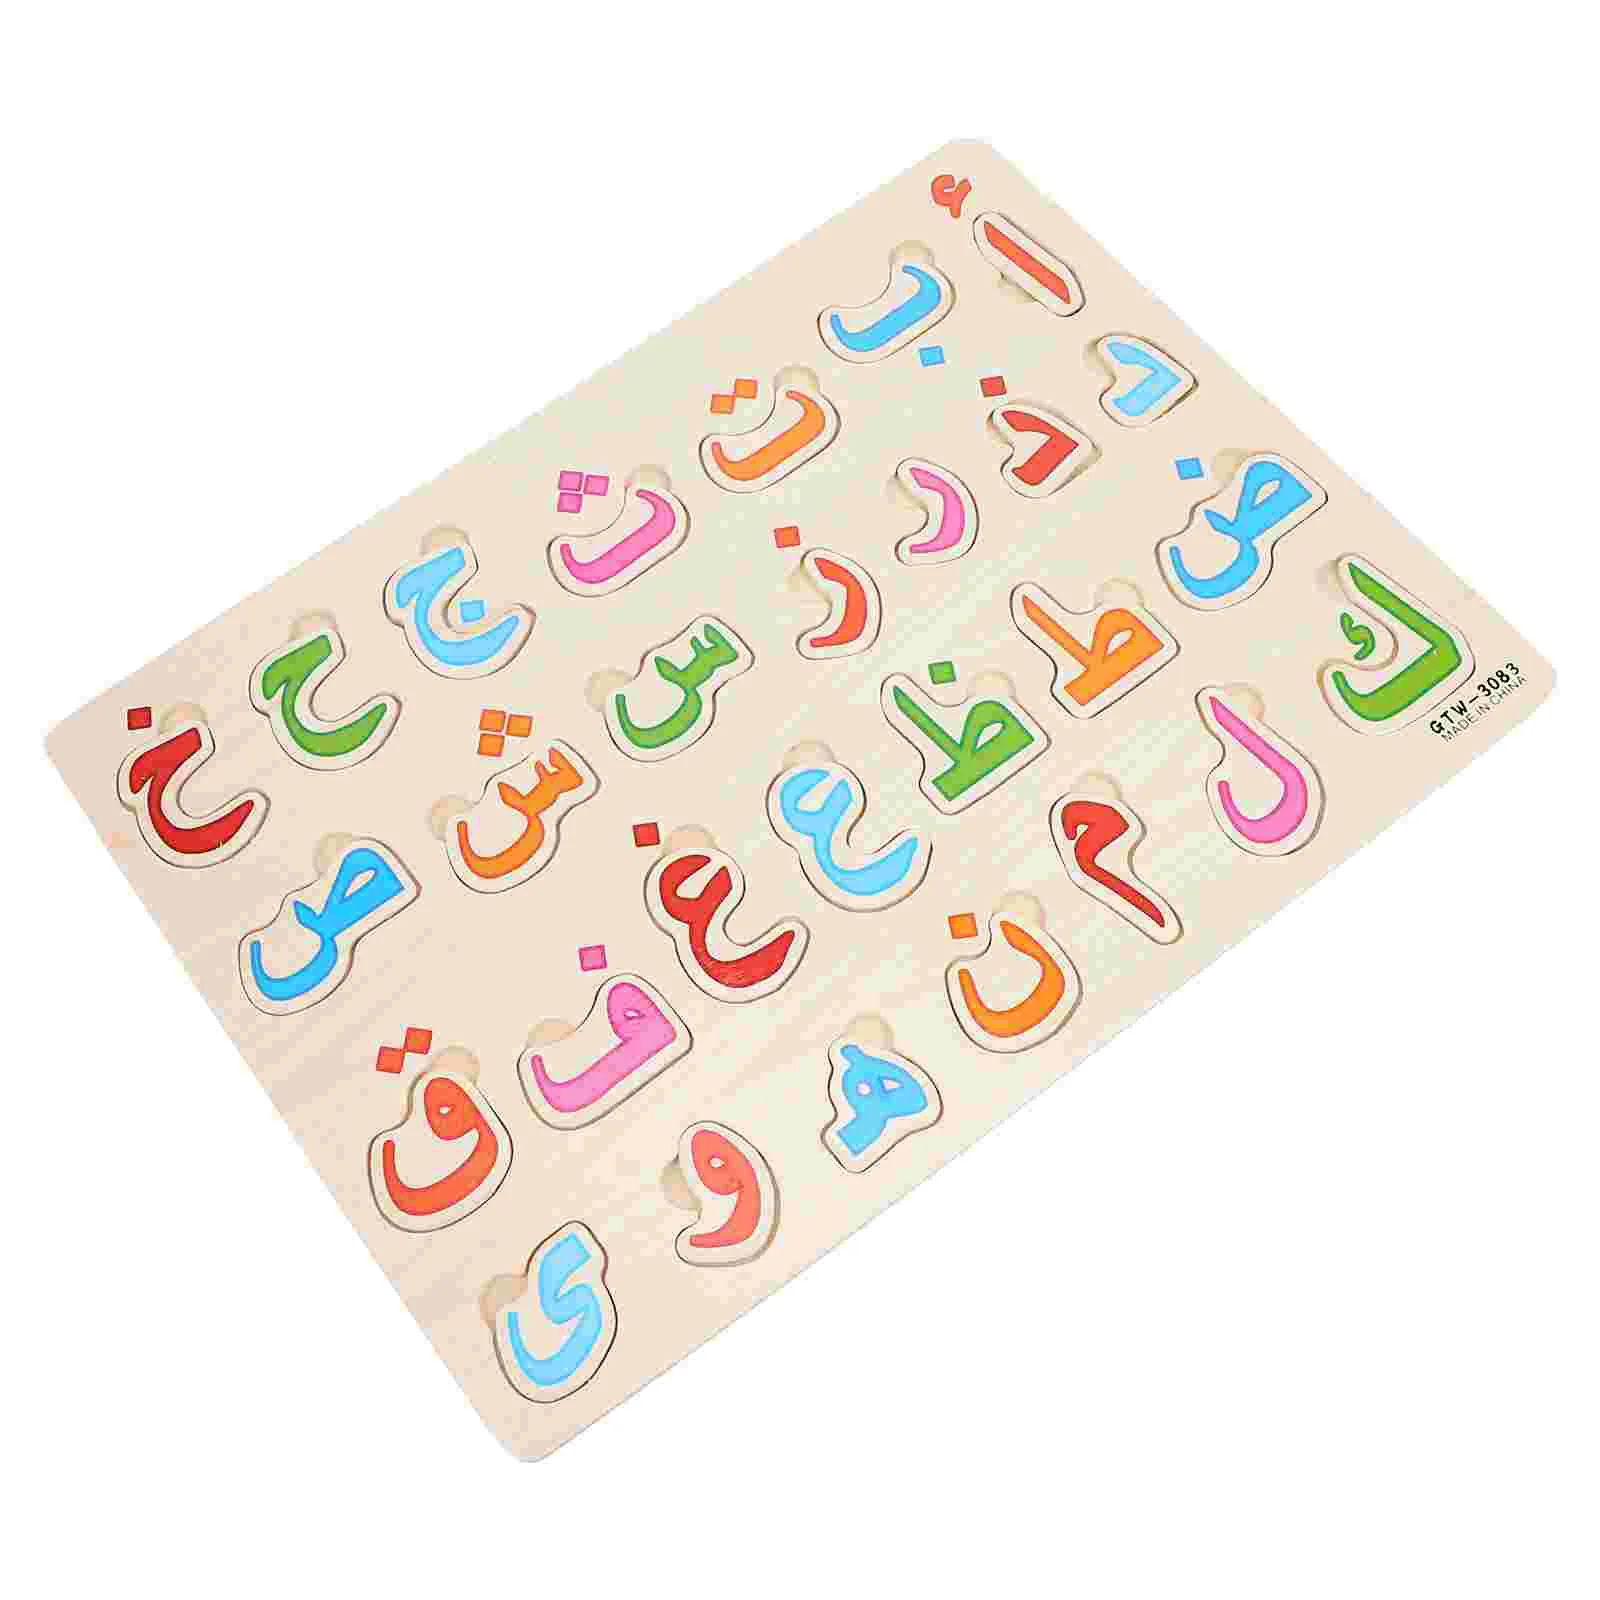 

Jigsaw Puzzle Arabic Preschool Wooden Puzzles Toddlers Boards Children Education Plaything